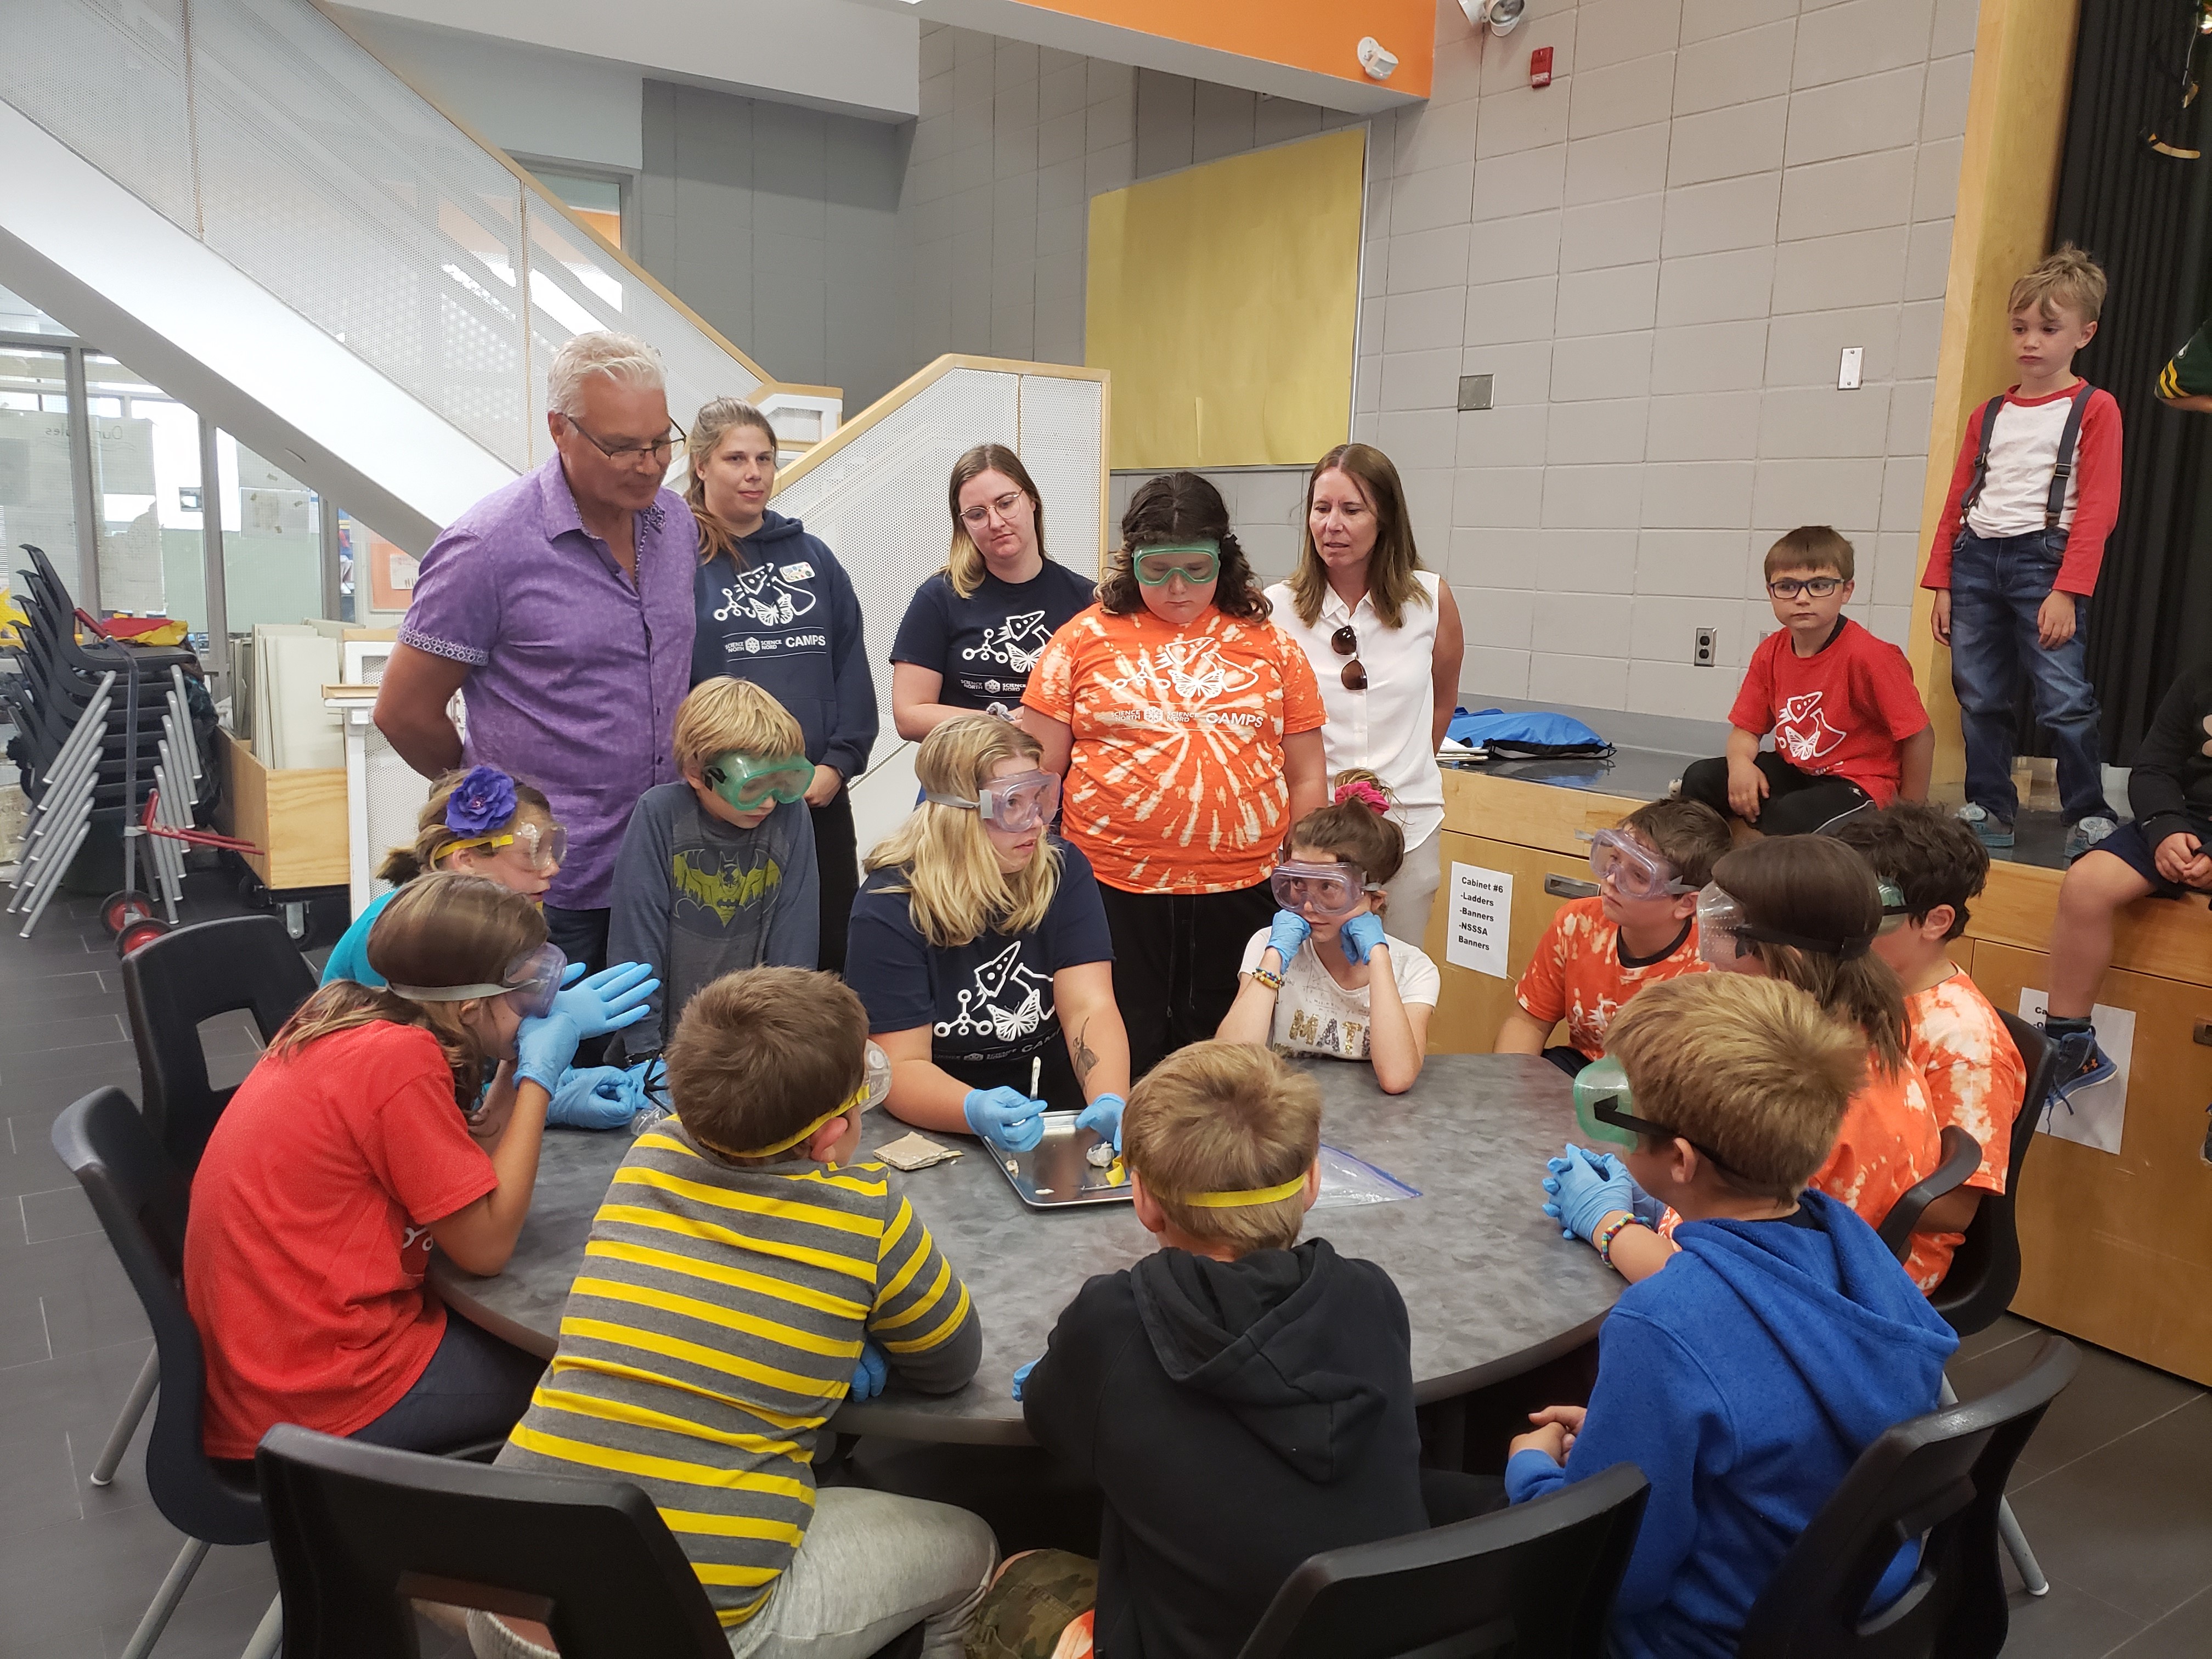 Norman Sandberg, NWMO Relationship Manager, and Carol Barnes, NWMO Community Liaison Manager, along with campers, watch a Science North staff member conduct a science demonstration.